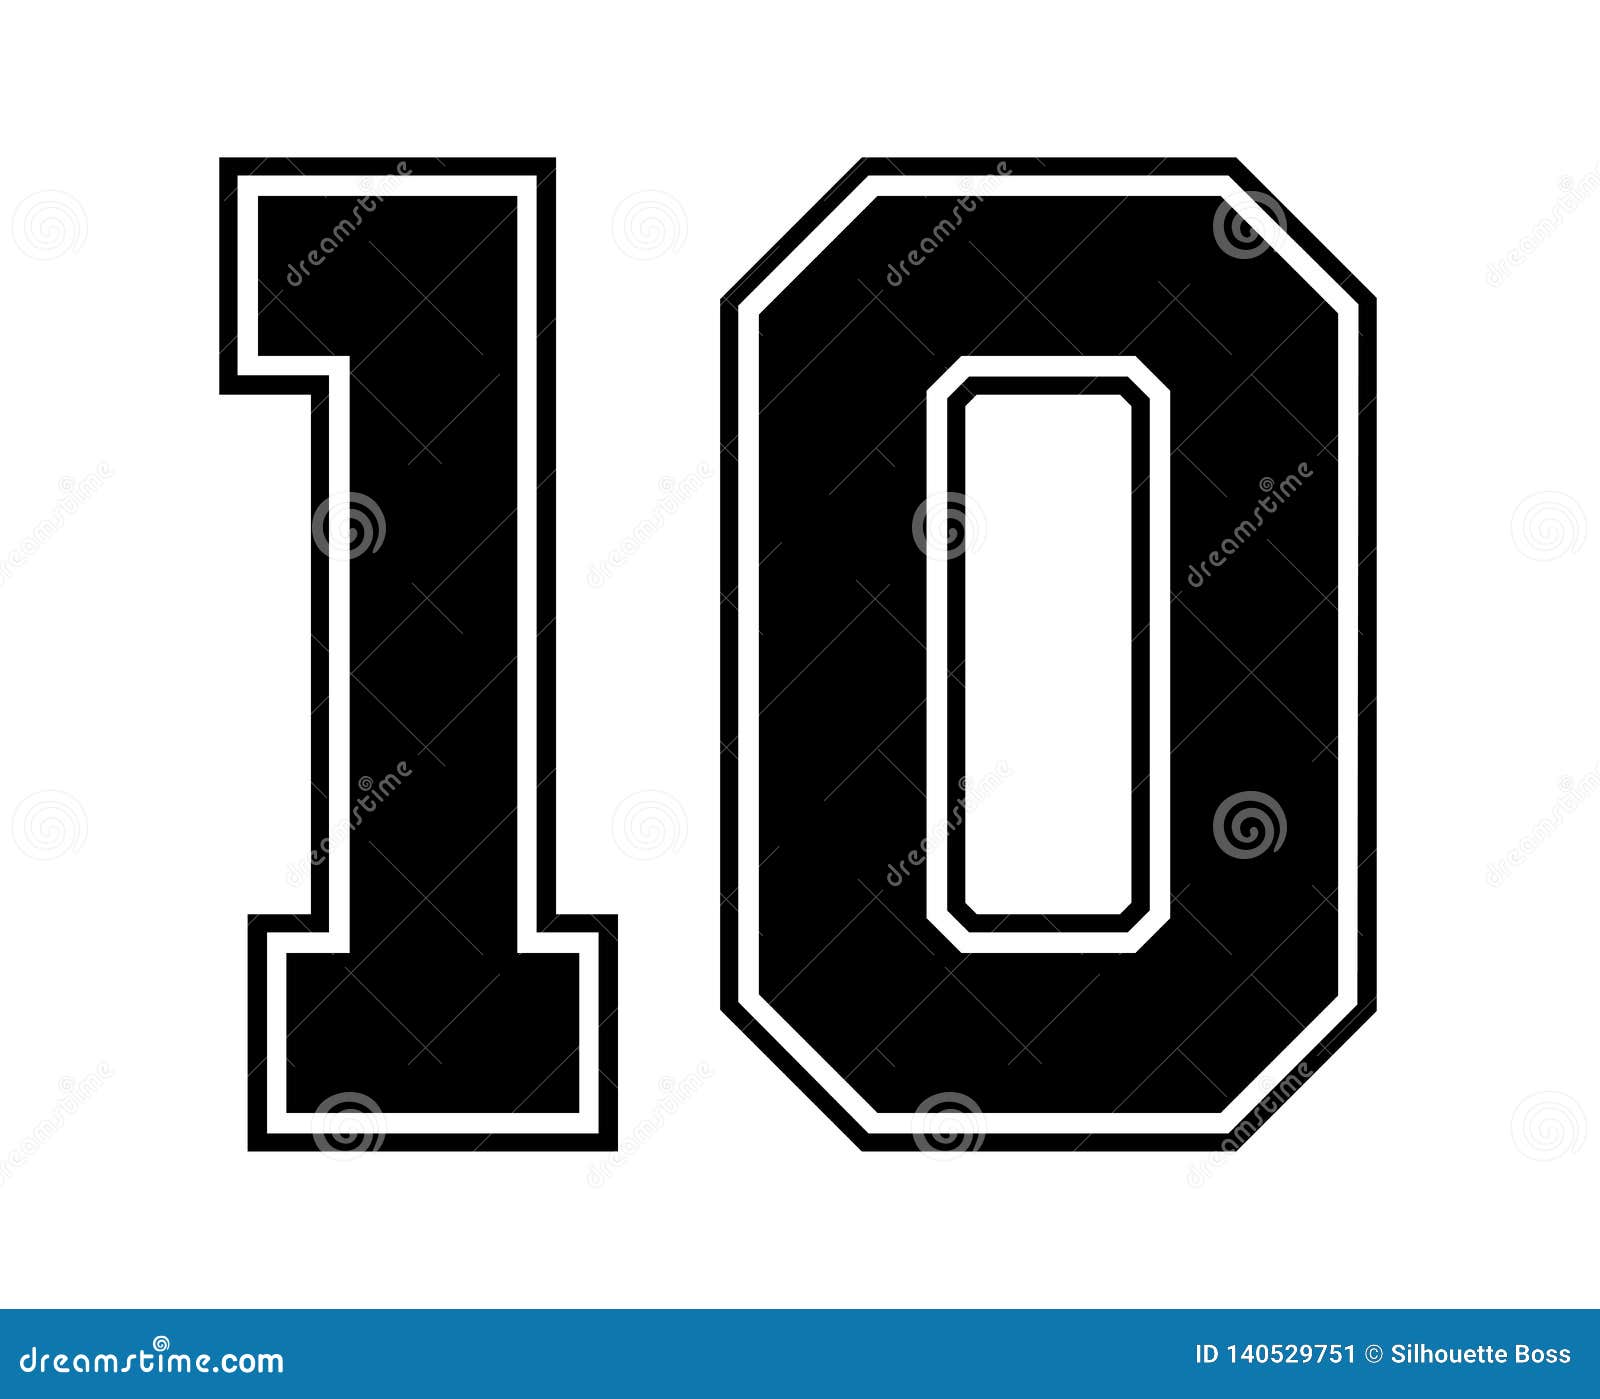 number 10 football jersey